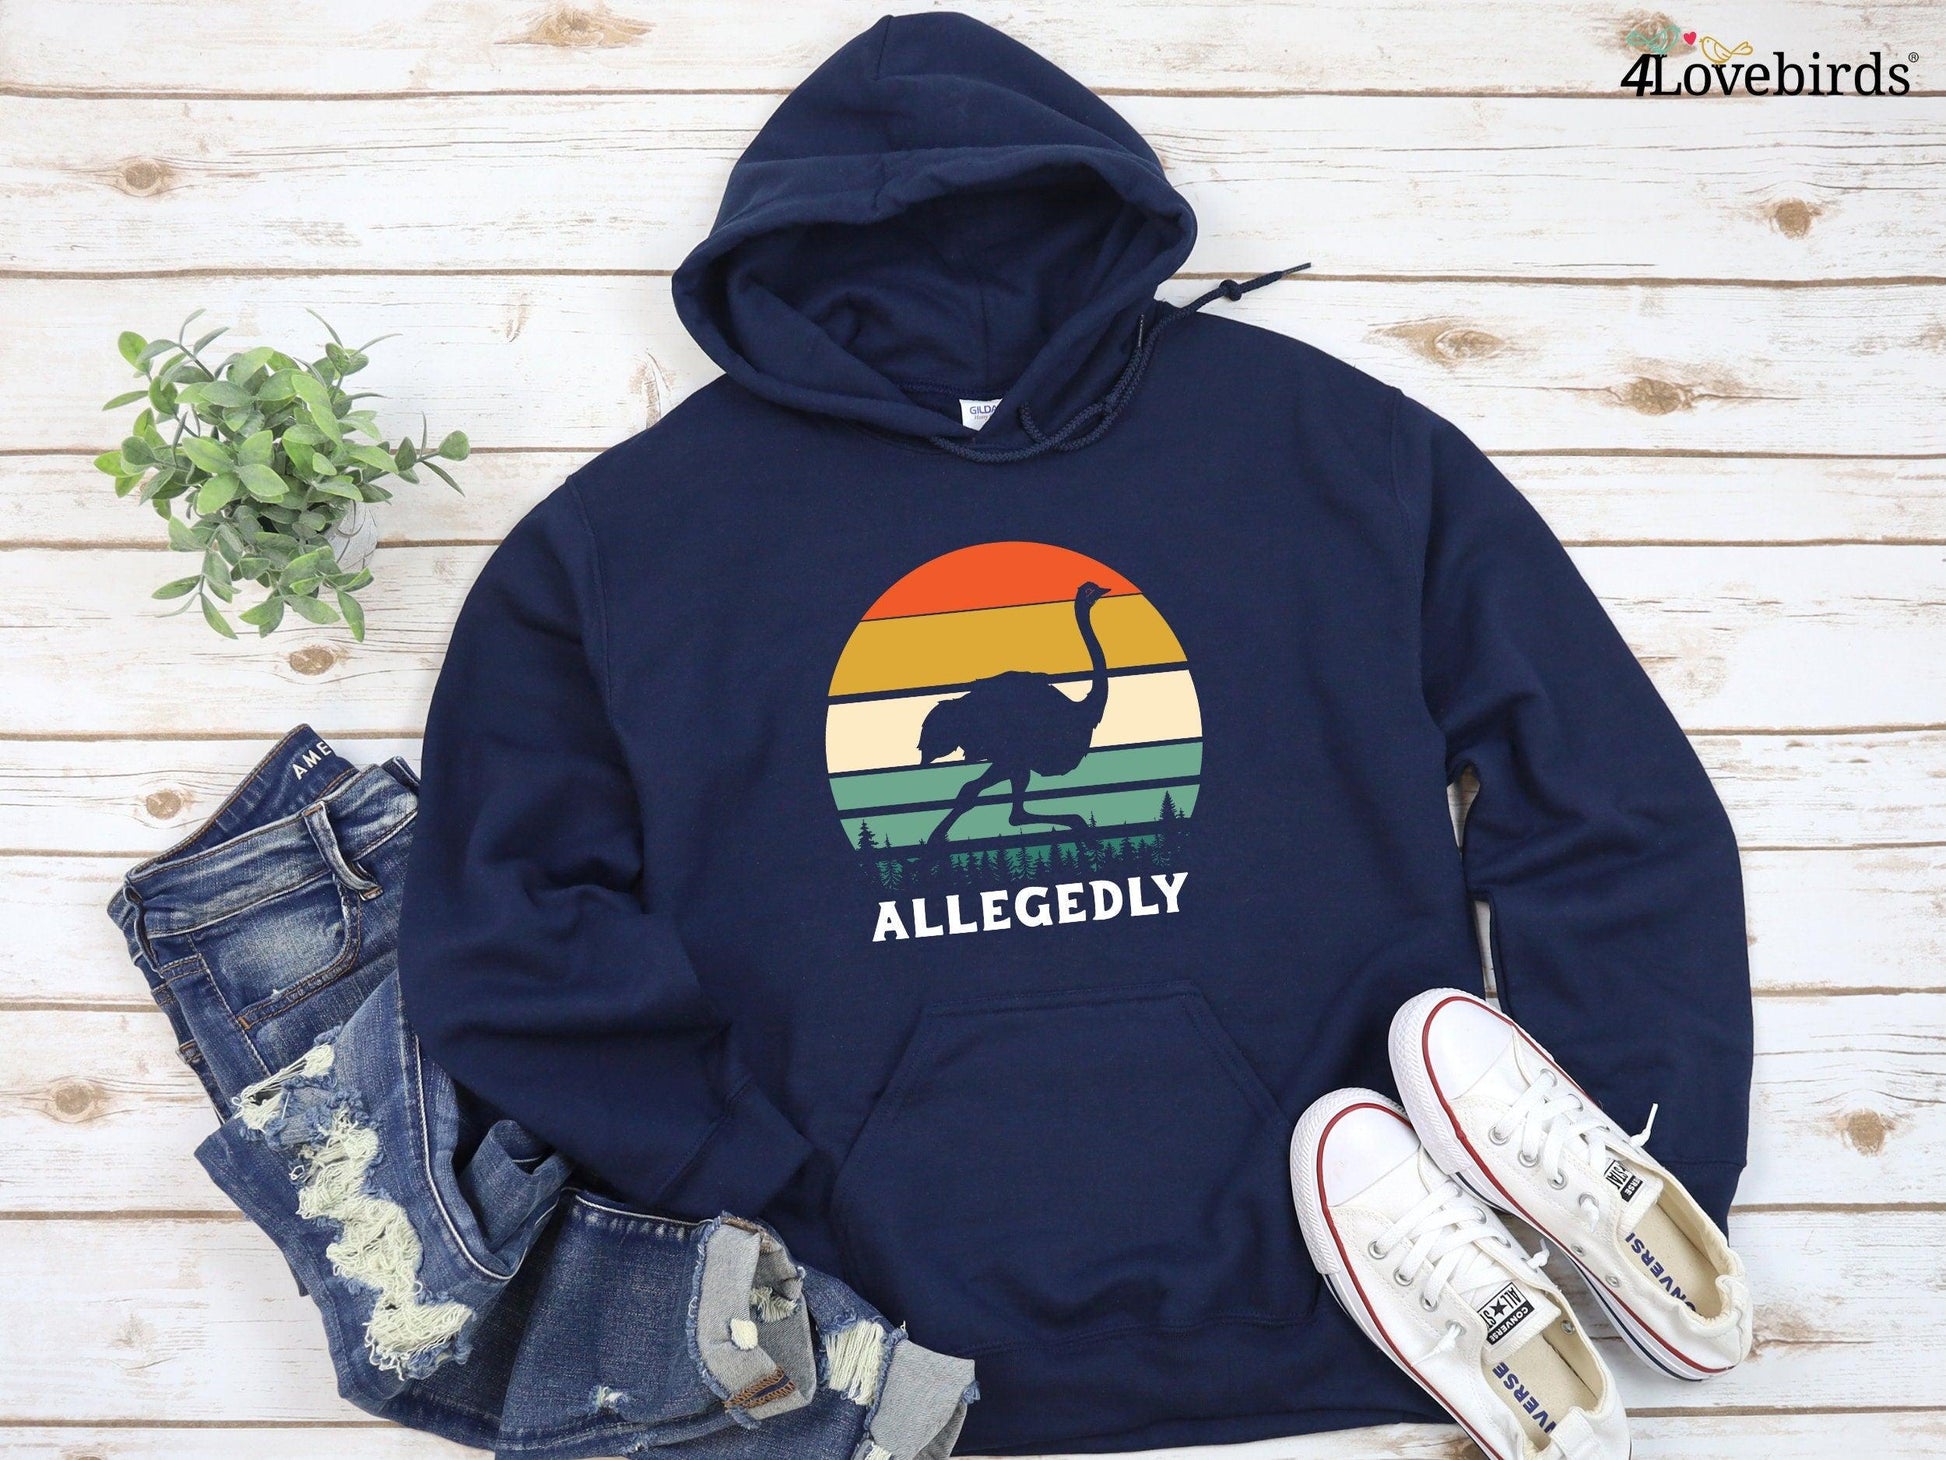 Allagedly Hoodie, Allegedly Ostrich, Valentines Day Sweatshirt, Gift for Valentines, Gift For Husband, Fathers Day Gift Long Sleeve Shirts - 4Lovebirds